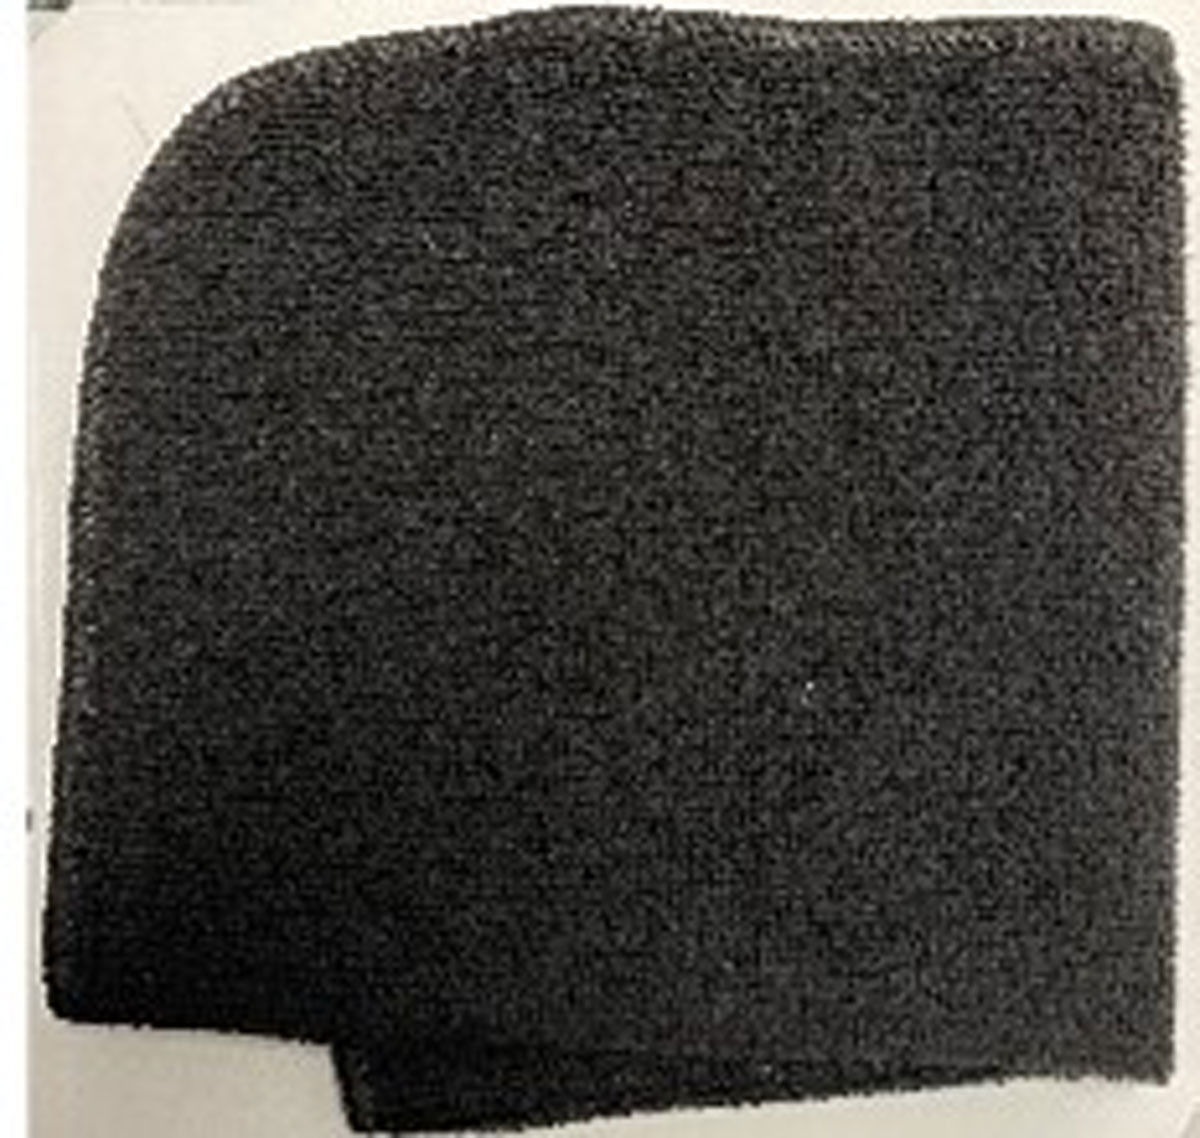 Can these black microfiber cloths be used for cleaning?